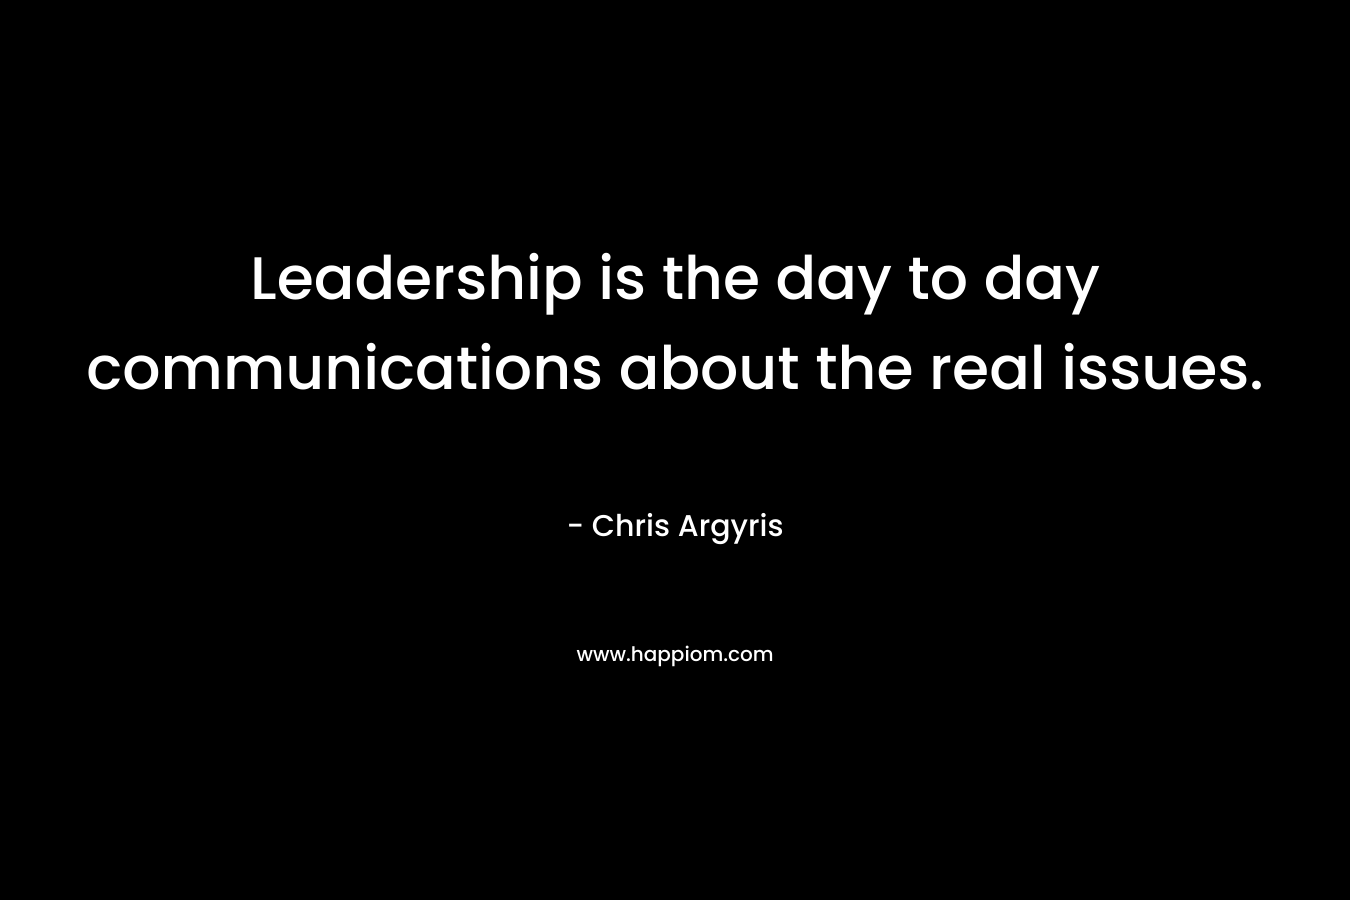 Leadership is the day to day communications about the real issues.